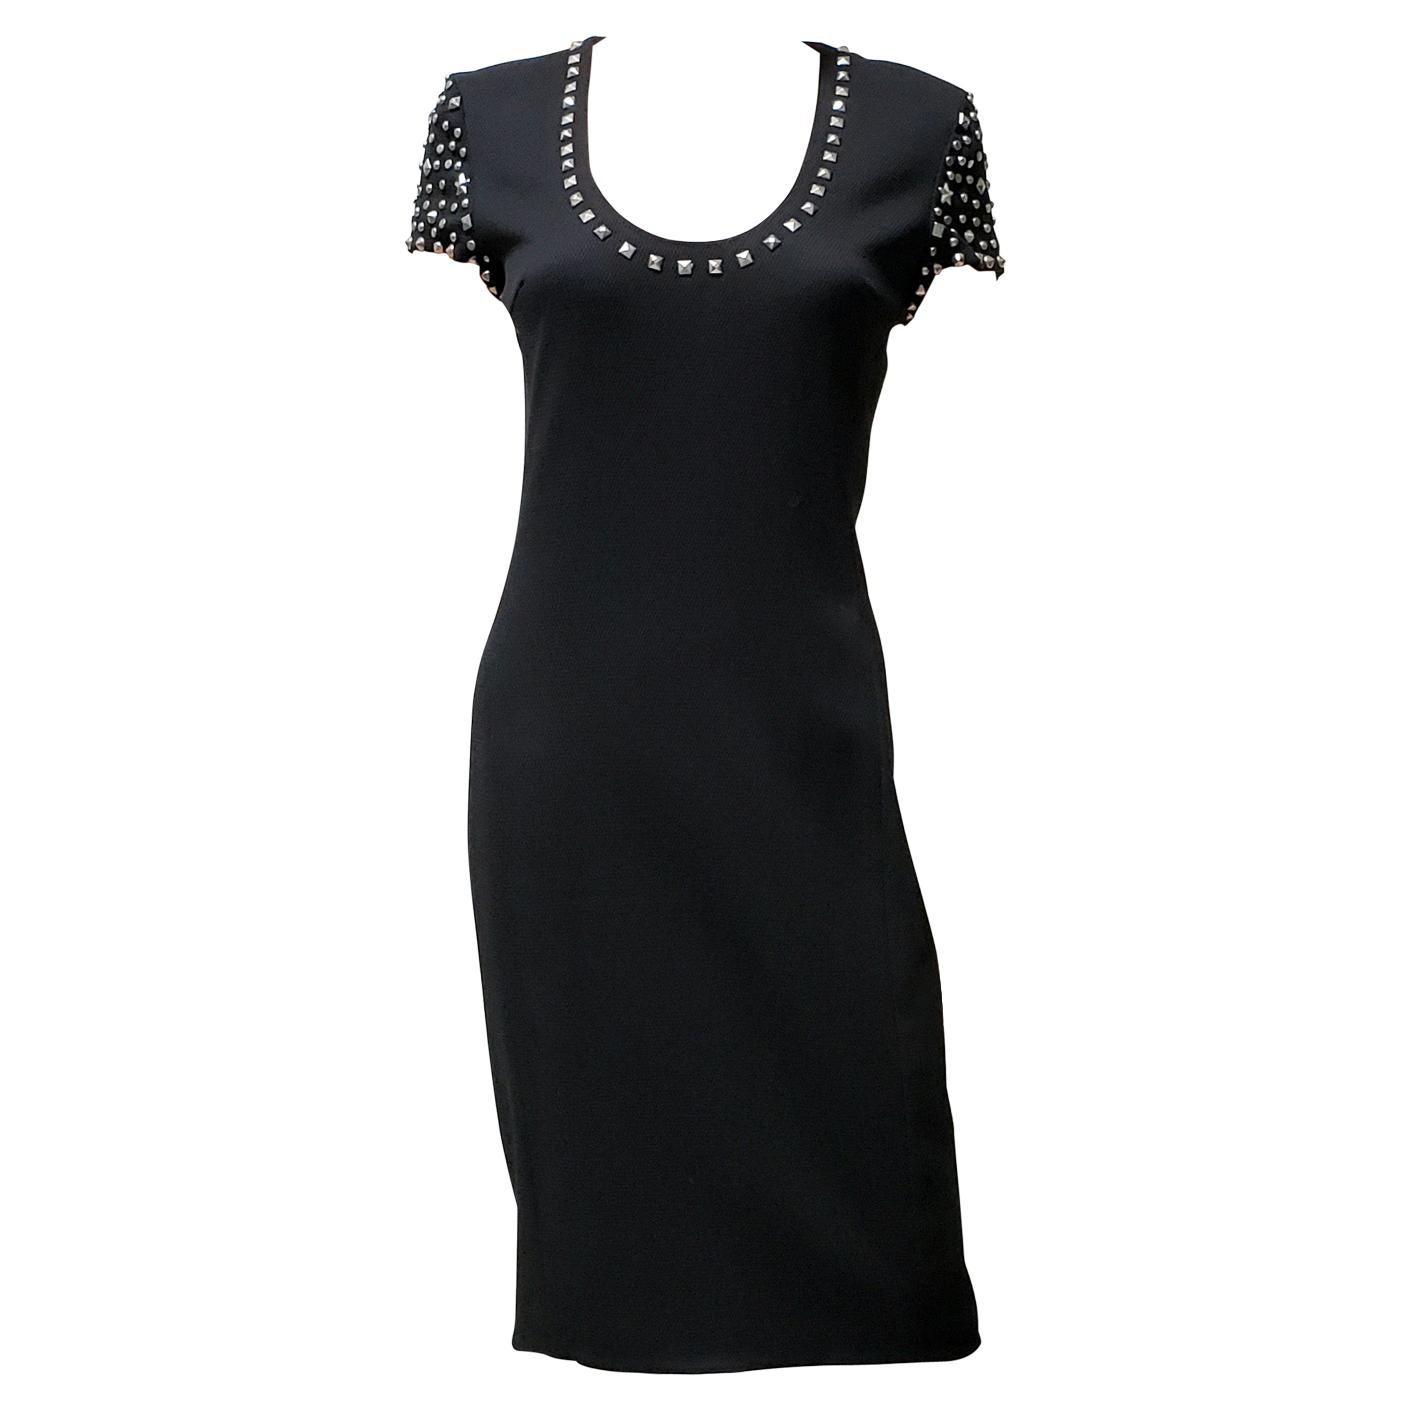 New GIANNI VERSACE COUTURE BLACK STUDDED DRESS 38 - 2, 40 - 4